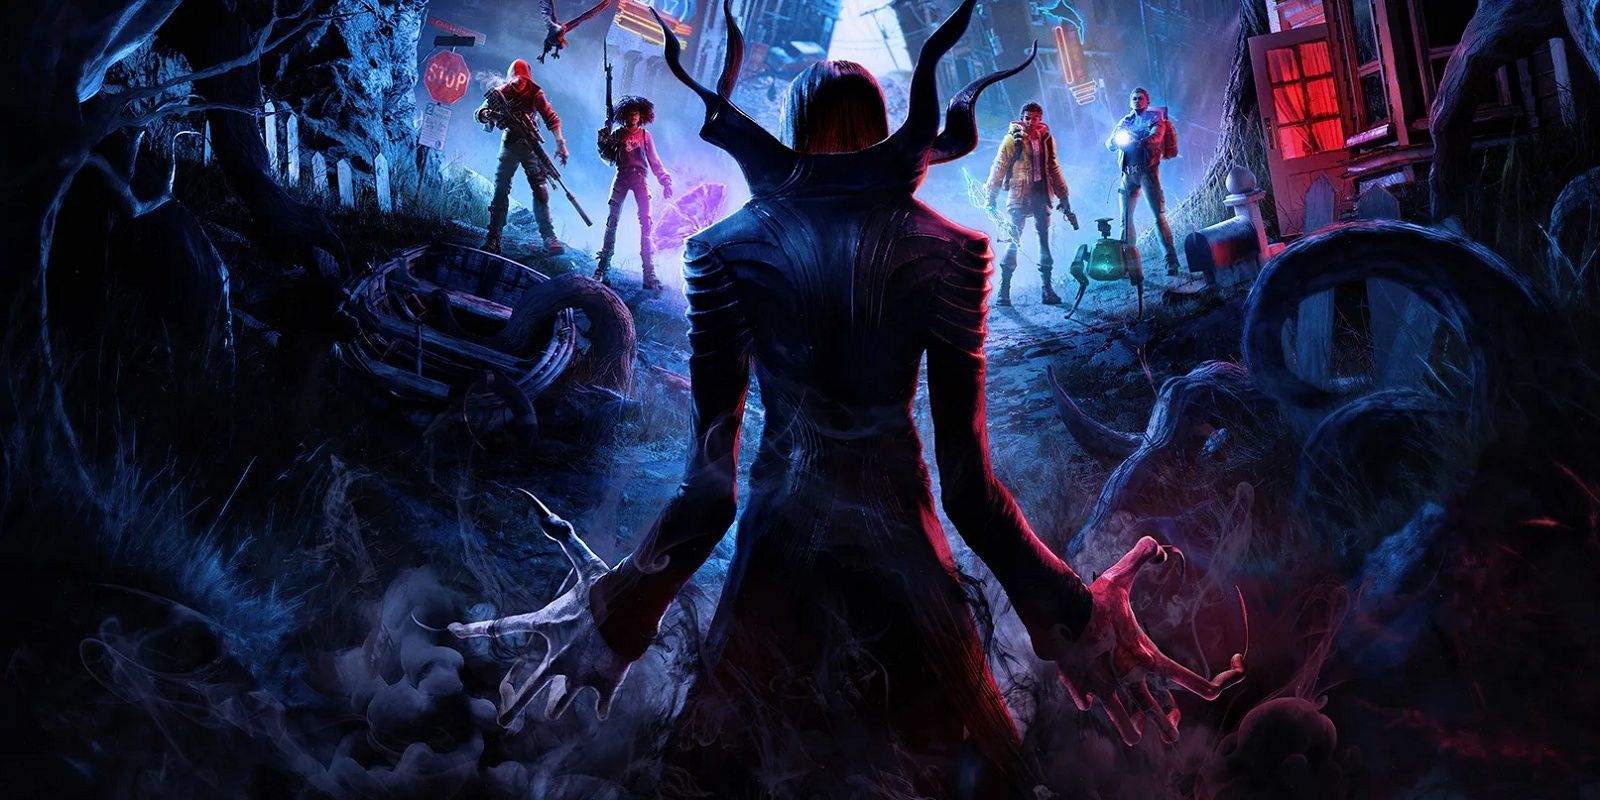 Redfall key art showing the heroes approaching a vampire